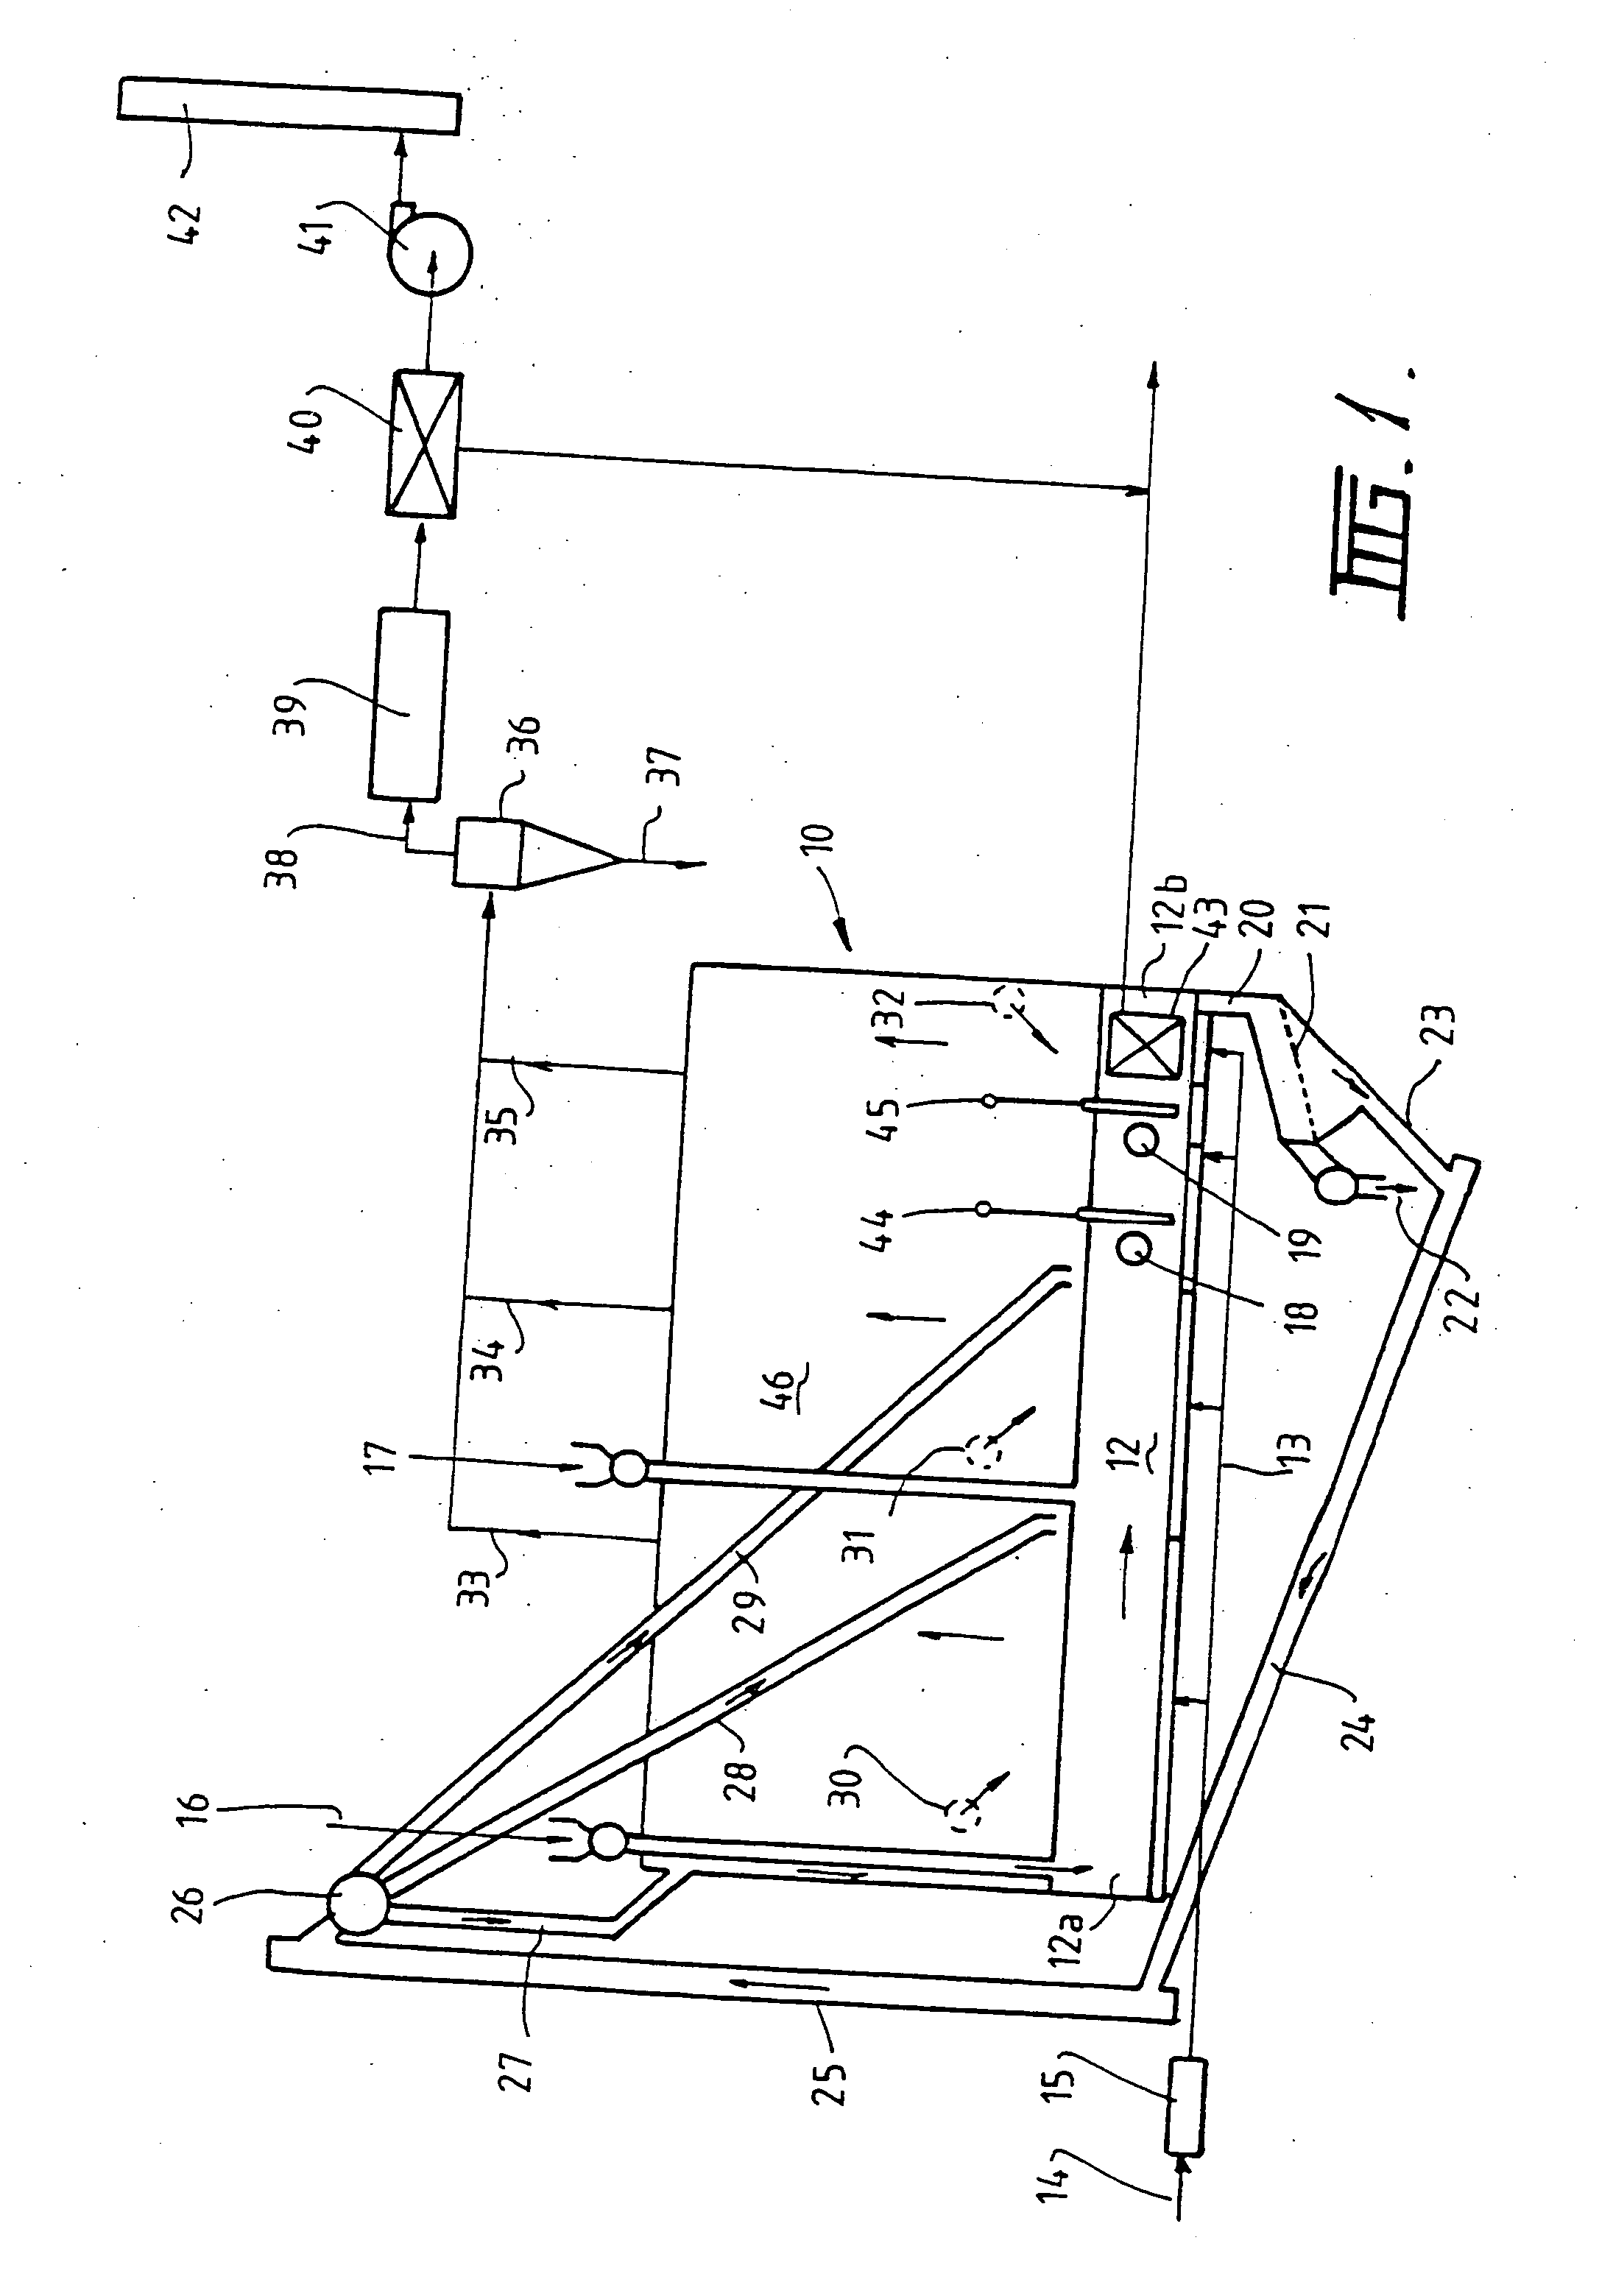 Process for carbonizing wood residues and producing activated carbon